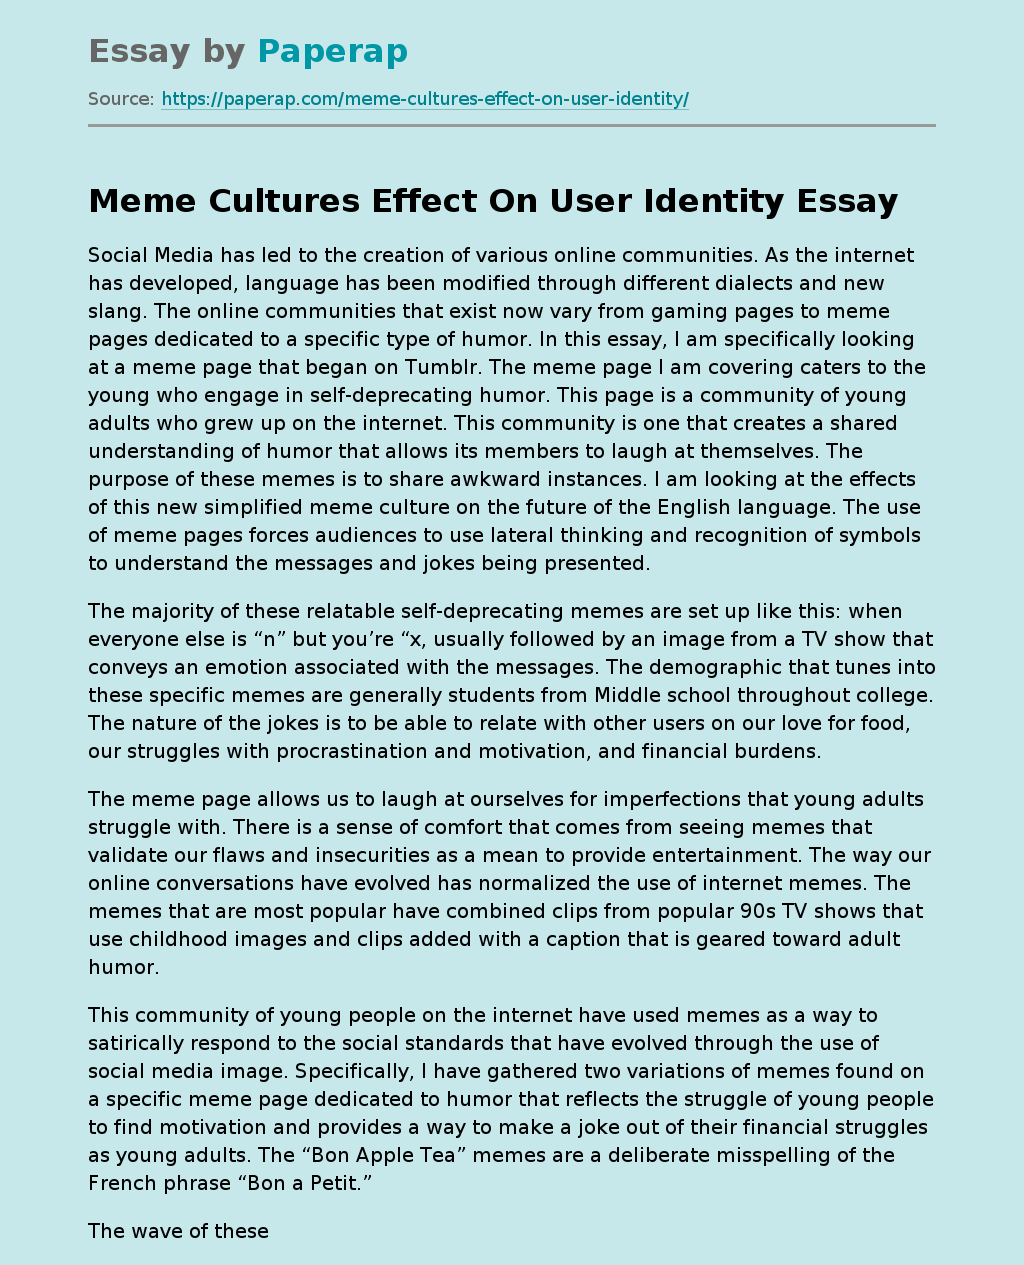 Meme Cultures Effect On User Identity